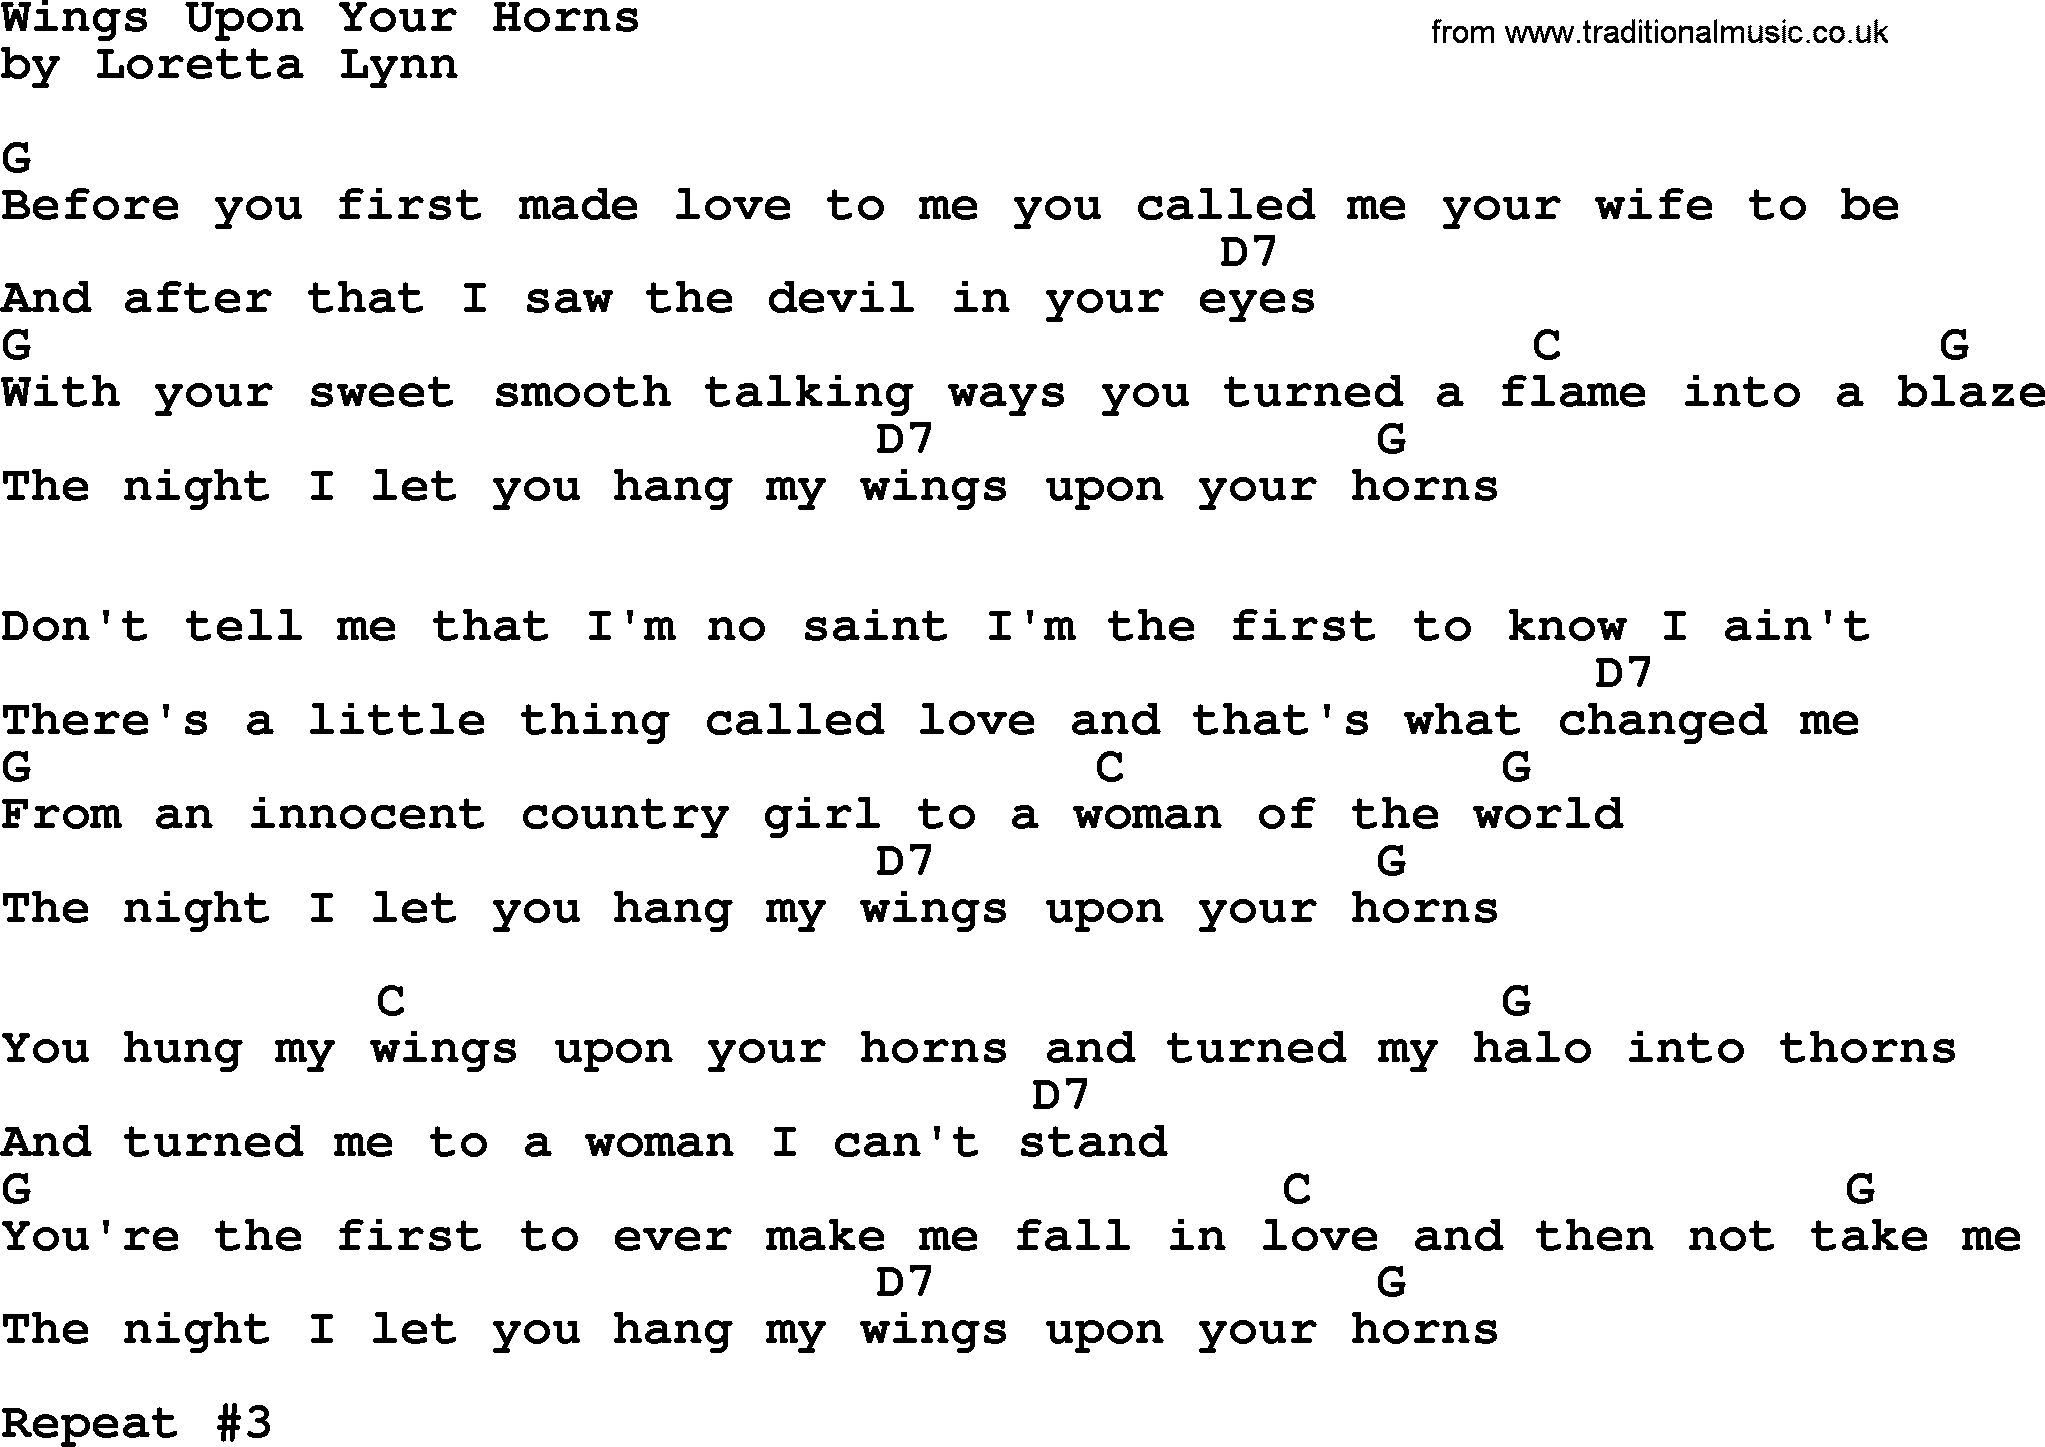 Loretta Lynn song: Wings Upon Your Horns lyrics and chords